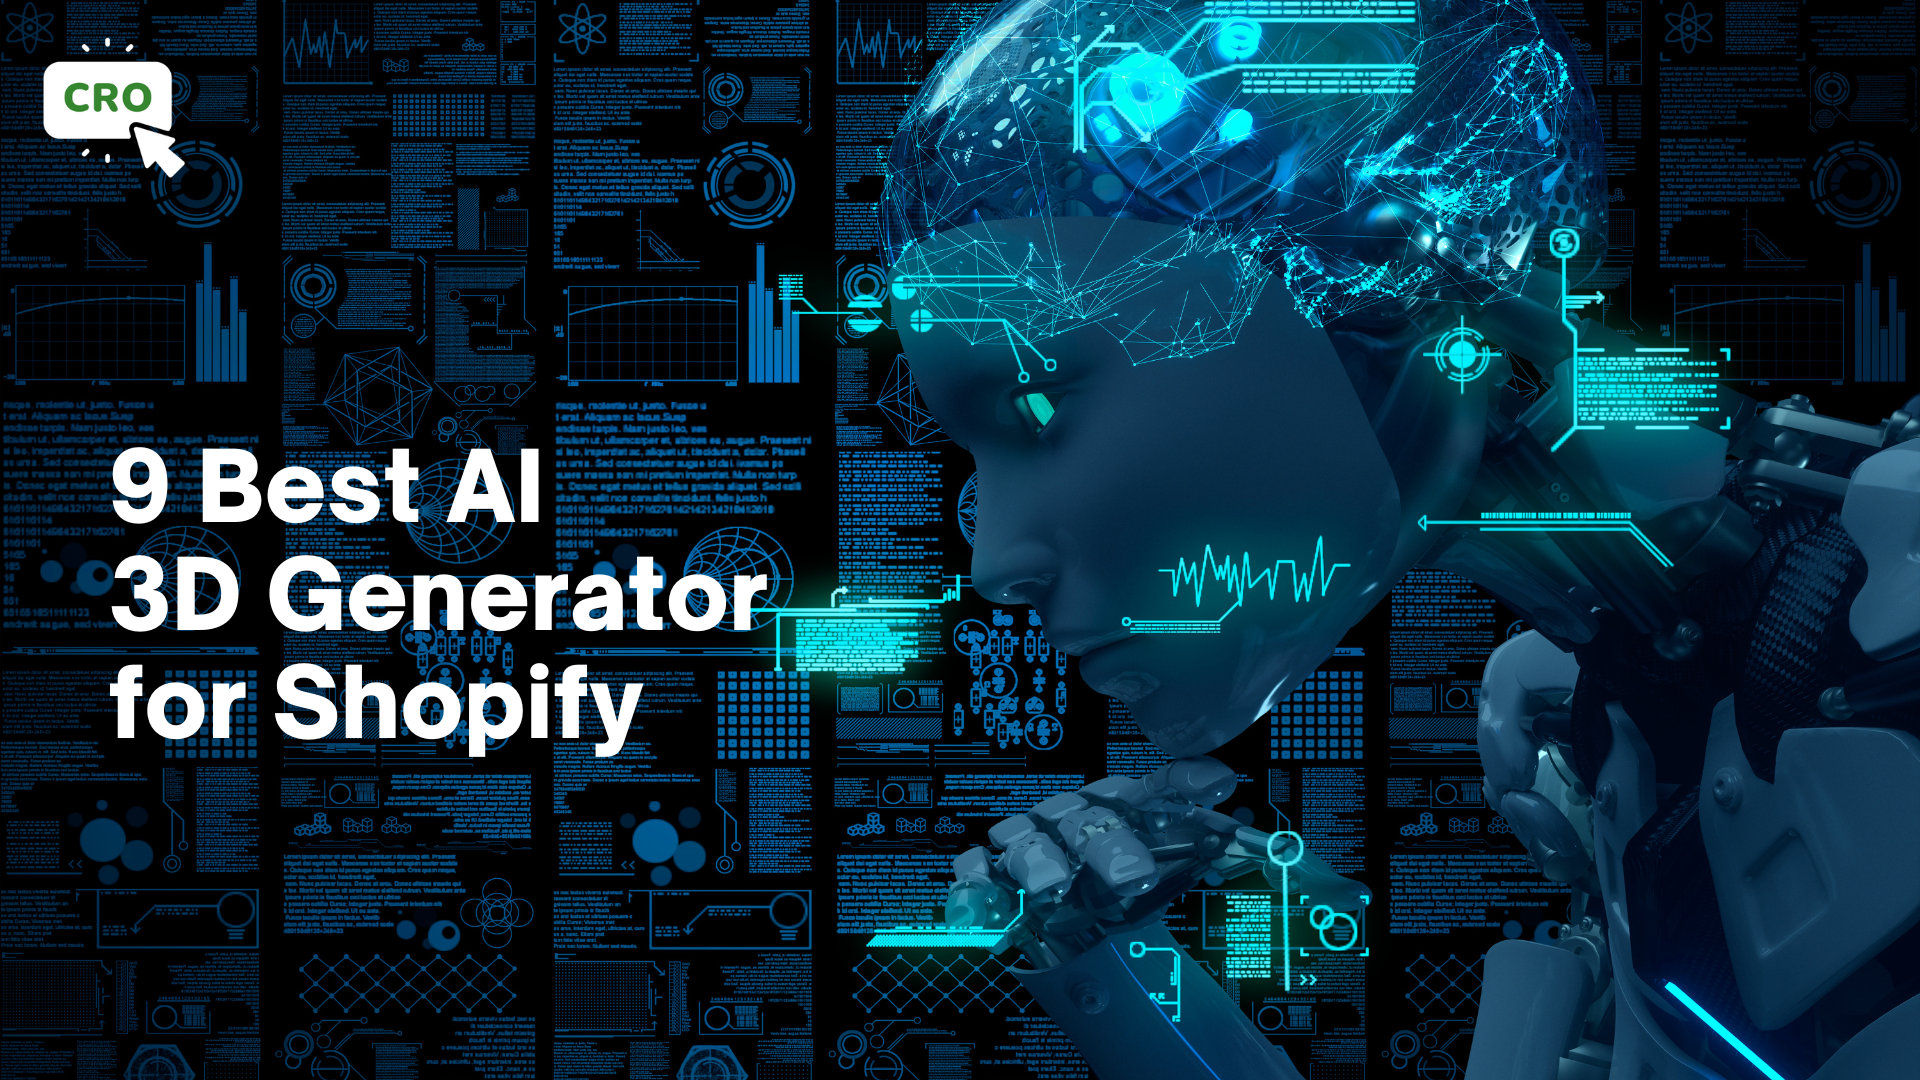 9 Best AI 3D Generator for Shopify